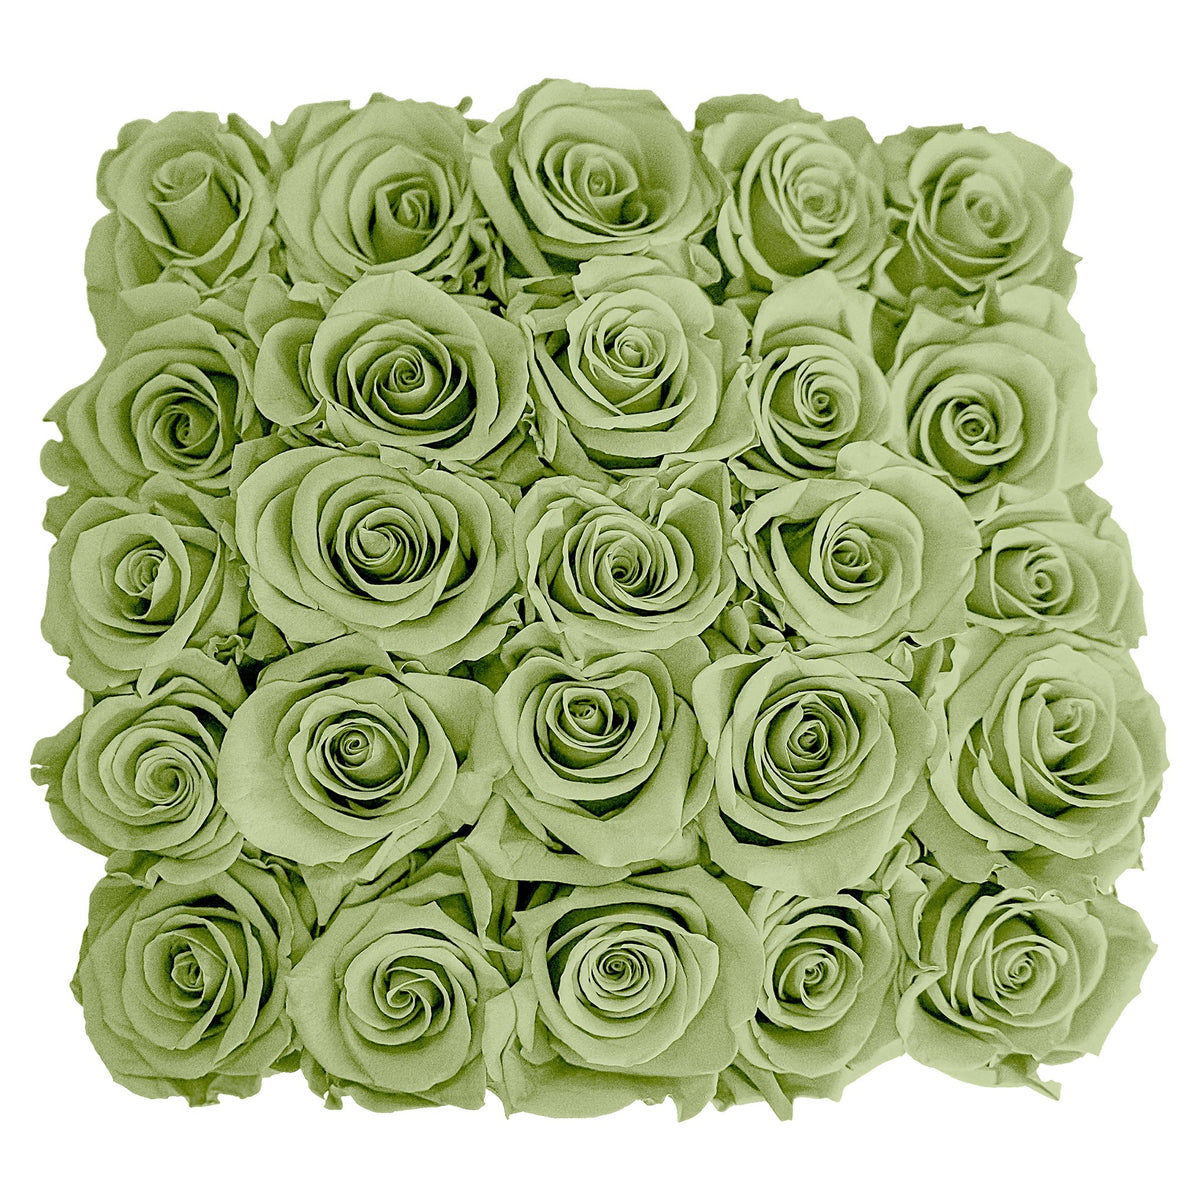 NYC Flower Delivery - Preserved Roses Small Box | Green - Roses